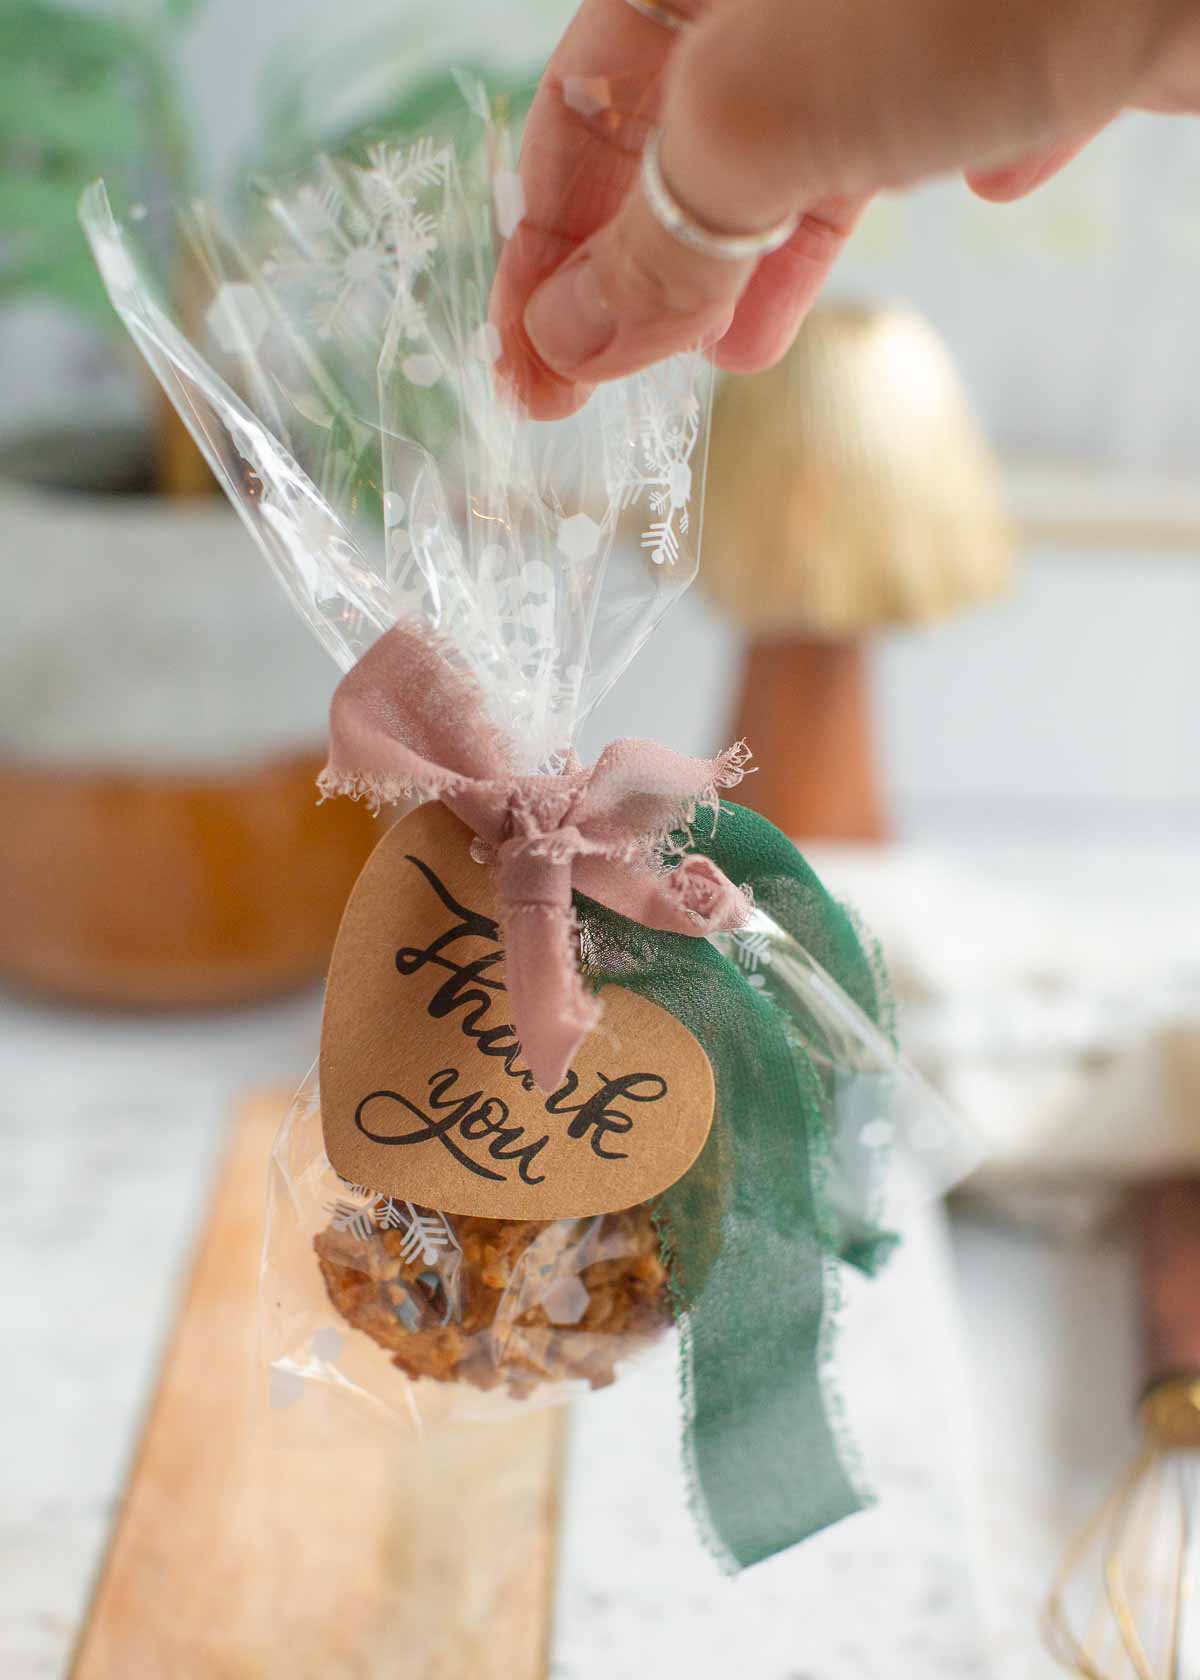 Vegan cookies from Back to Nature in cellophane holiday bags with snowflakes, a green ribbon, and a thank you note attached. 